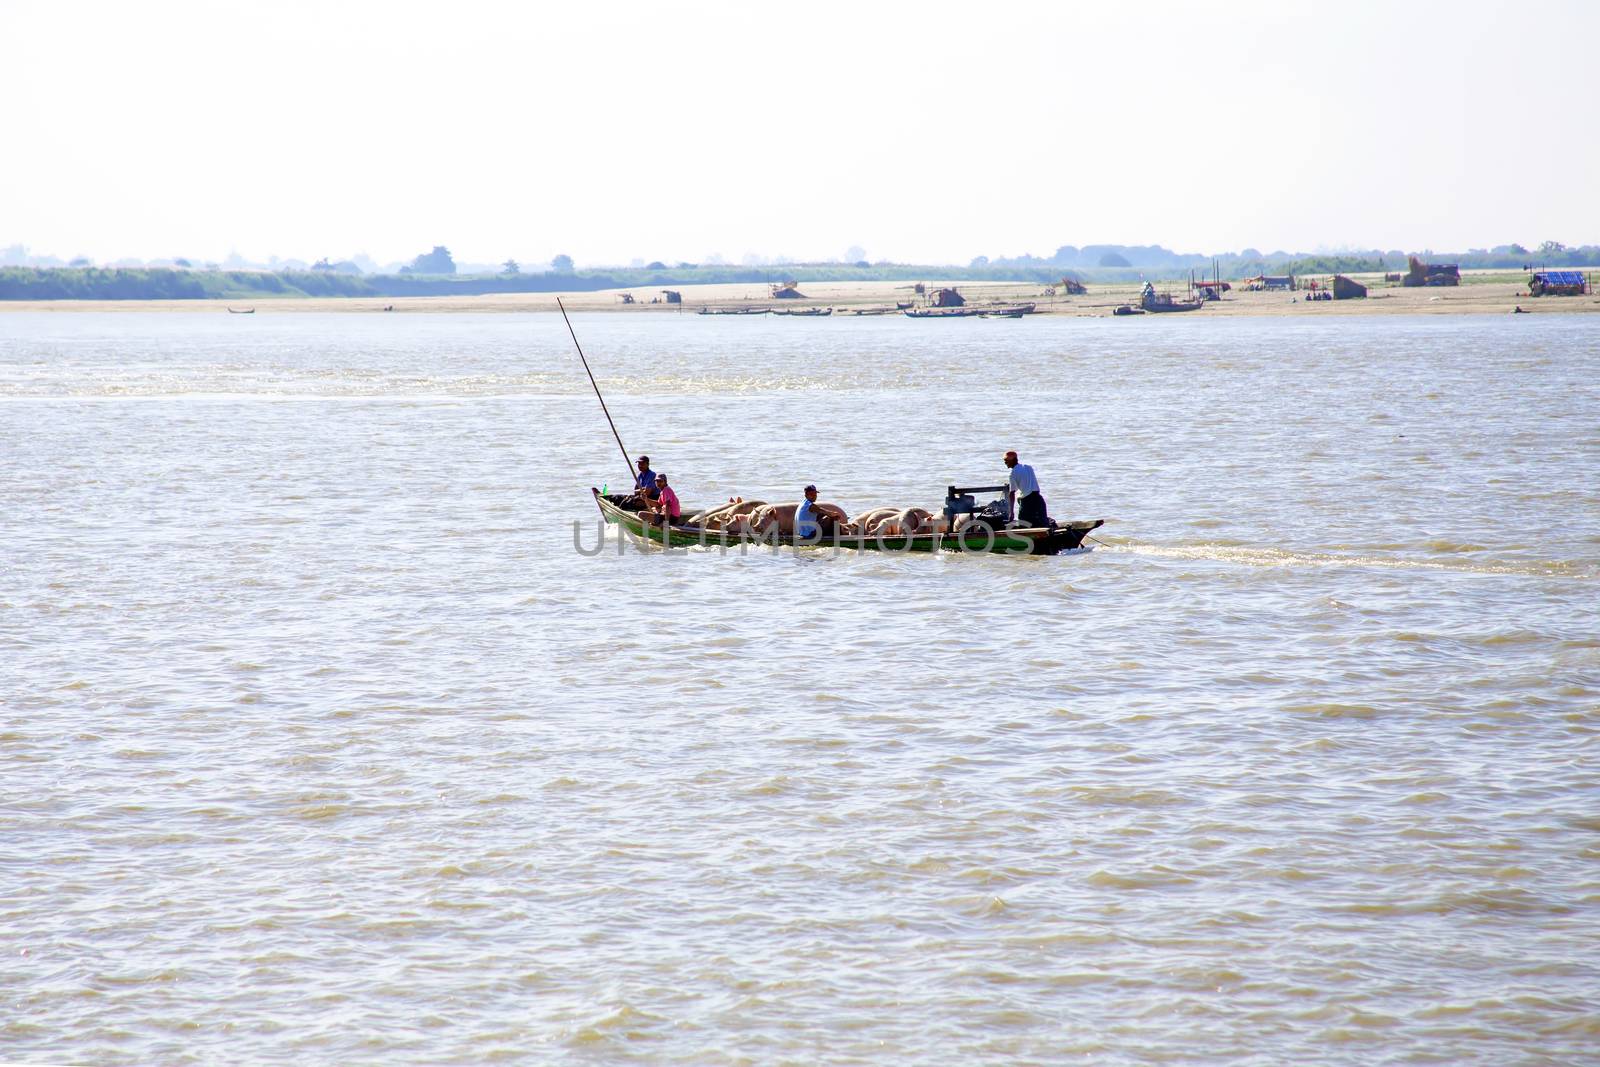 IRRAWADY RIVER, MYANMAR - November 17, 2015: Transporting pigs on the Irrawaddy River. The Irrawady river or Ayeyarwady River is a river that flows from north to south through Myanmar. It is the country's largest river and most important commercial waterway. 